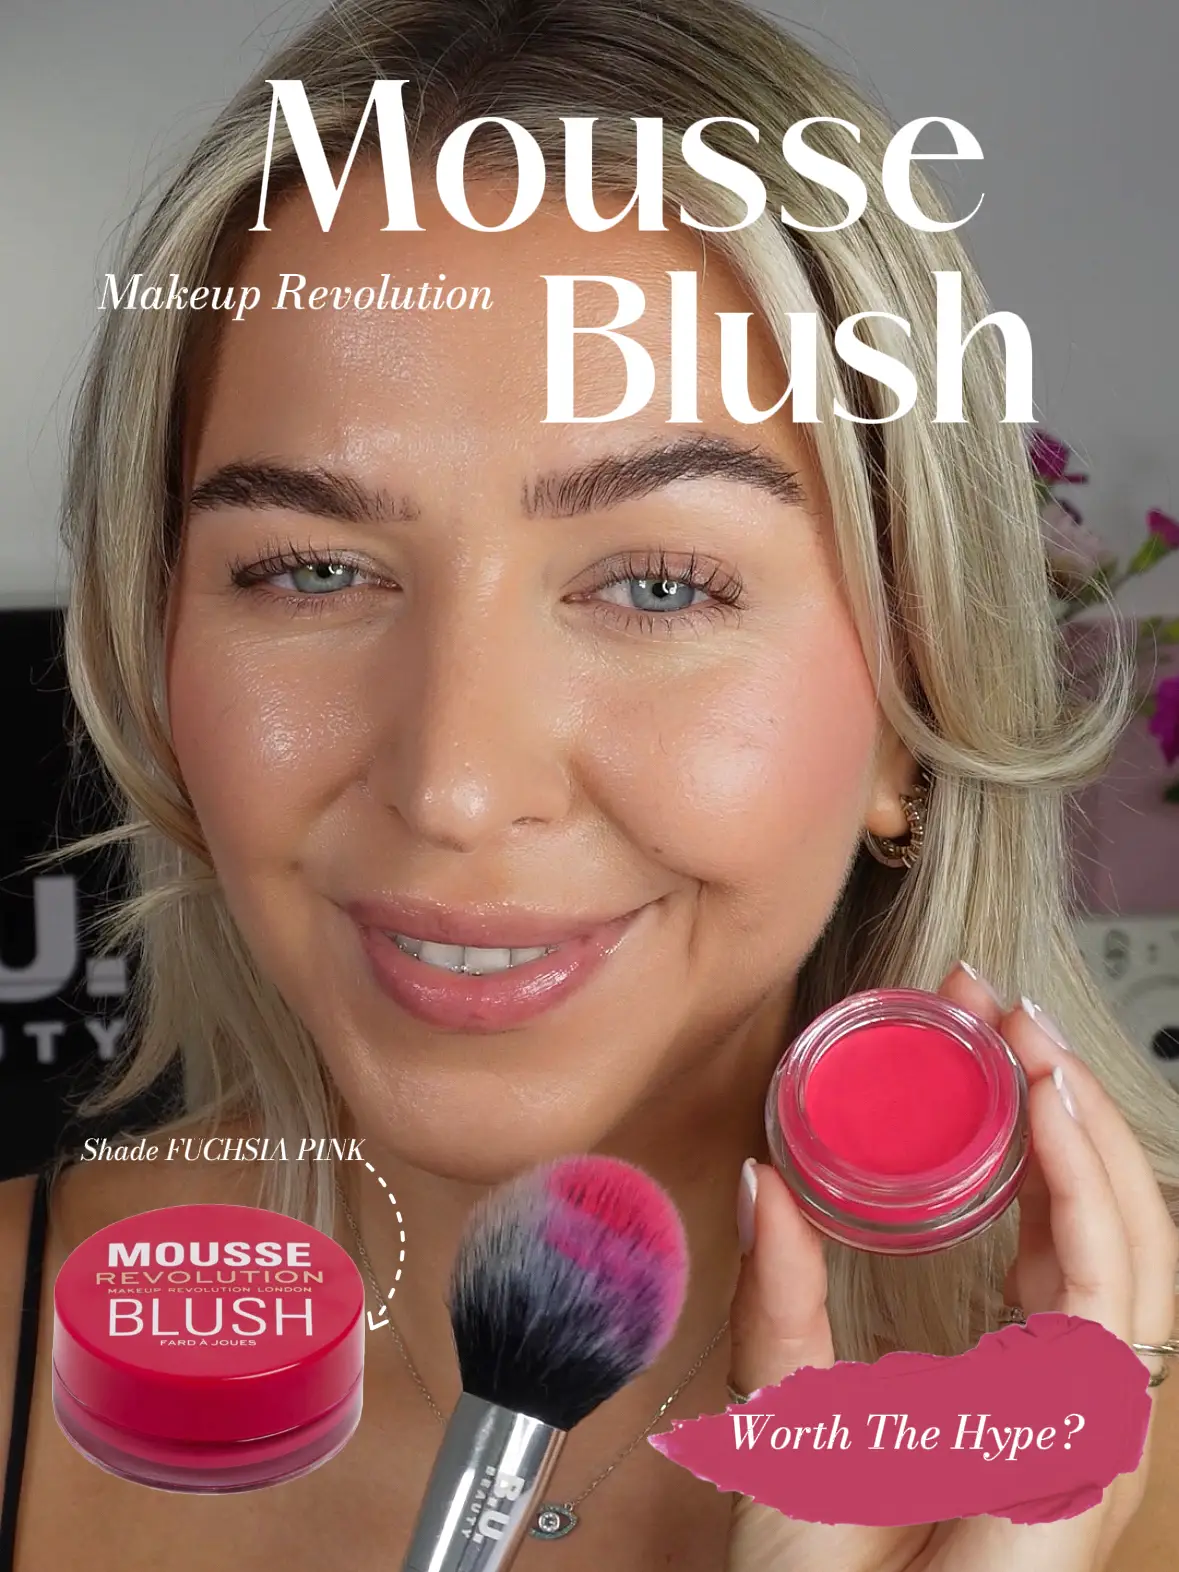 Revolution Mousse Blush Honest Review, Gallery posted by Ingrida G